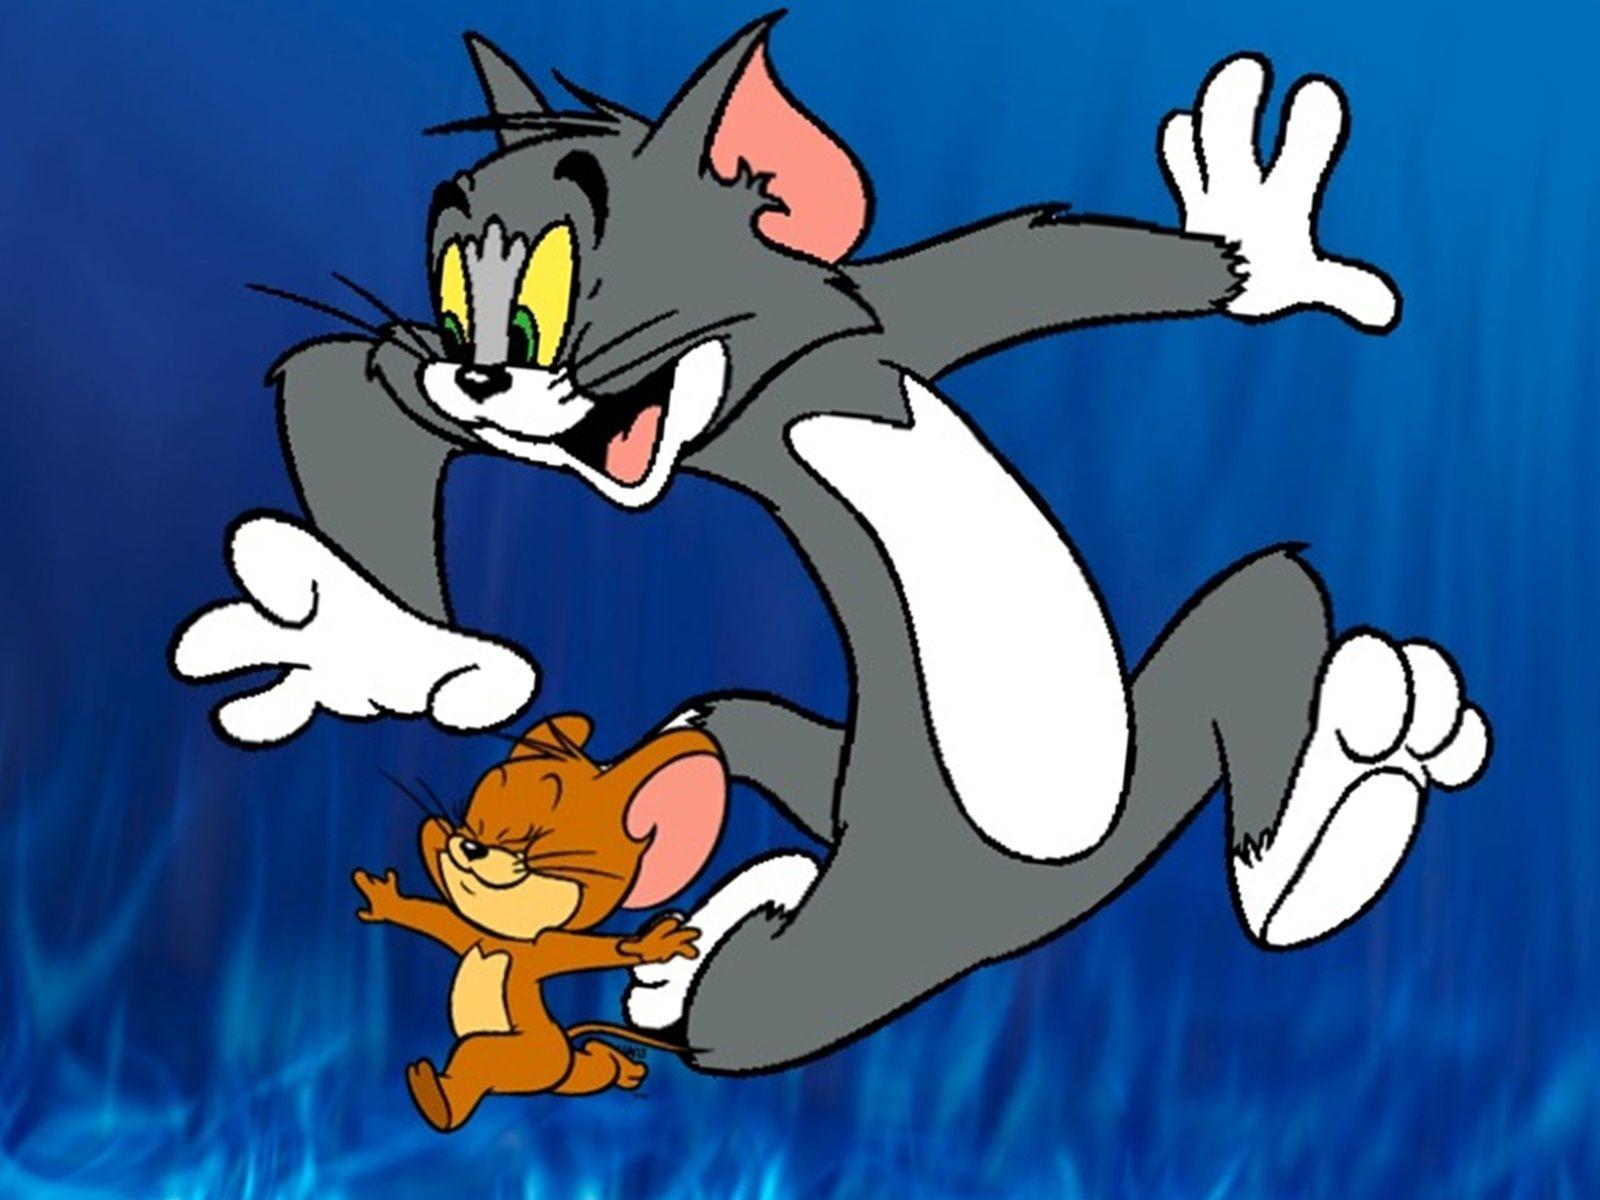 are tom and jerry best friends